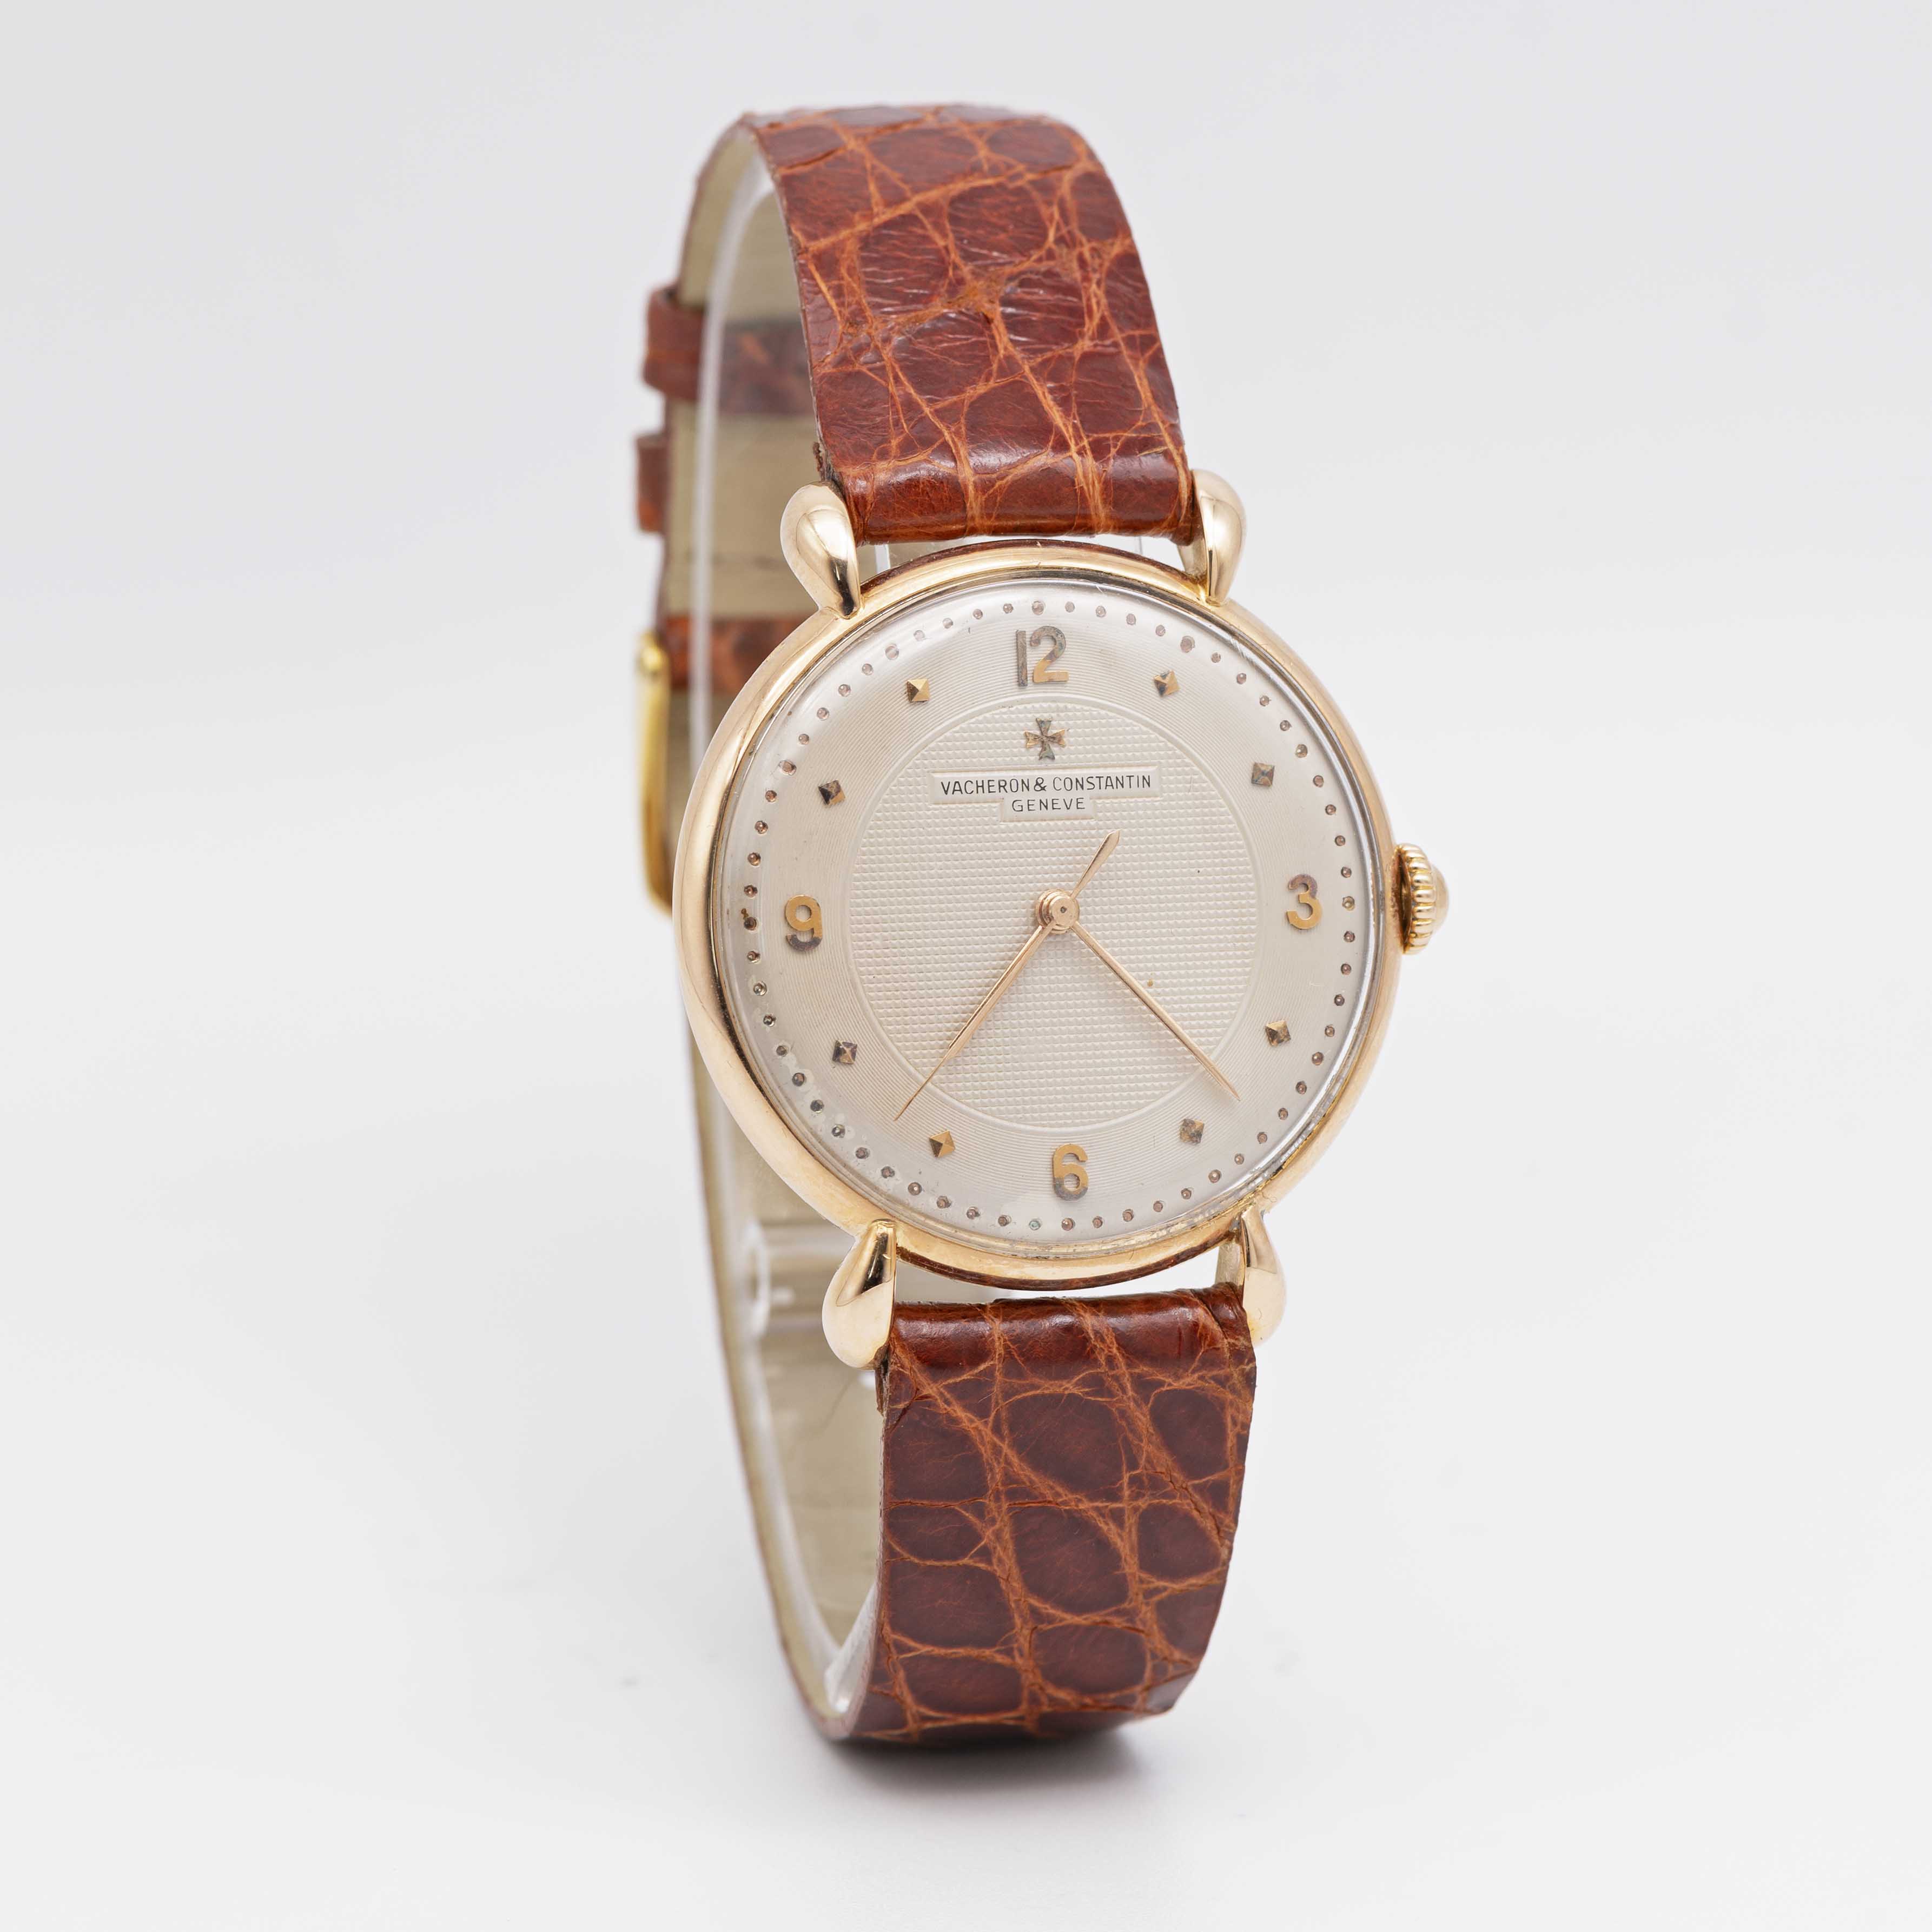 A GENTLEMAN'S 18K SOLID ROSE GOLD VACHERON & CONSTANTIN WRIST WATCH CIRCA 1950s, WITH GUILLOCHE DIAL - Image 4 of 8